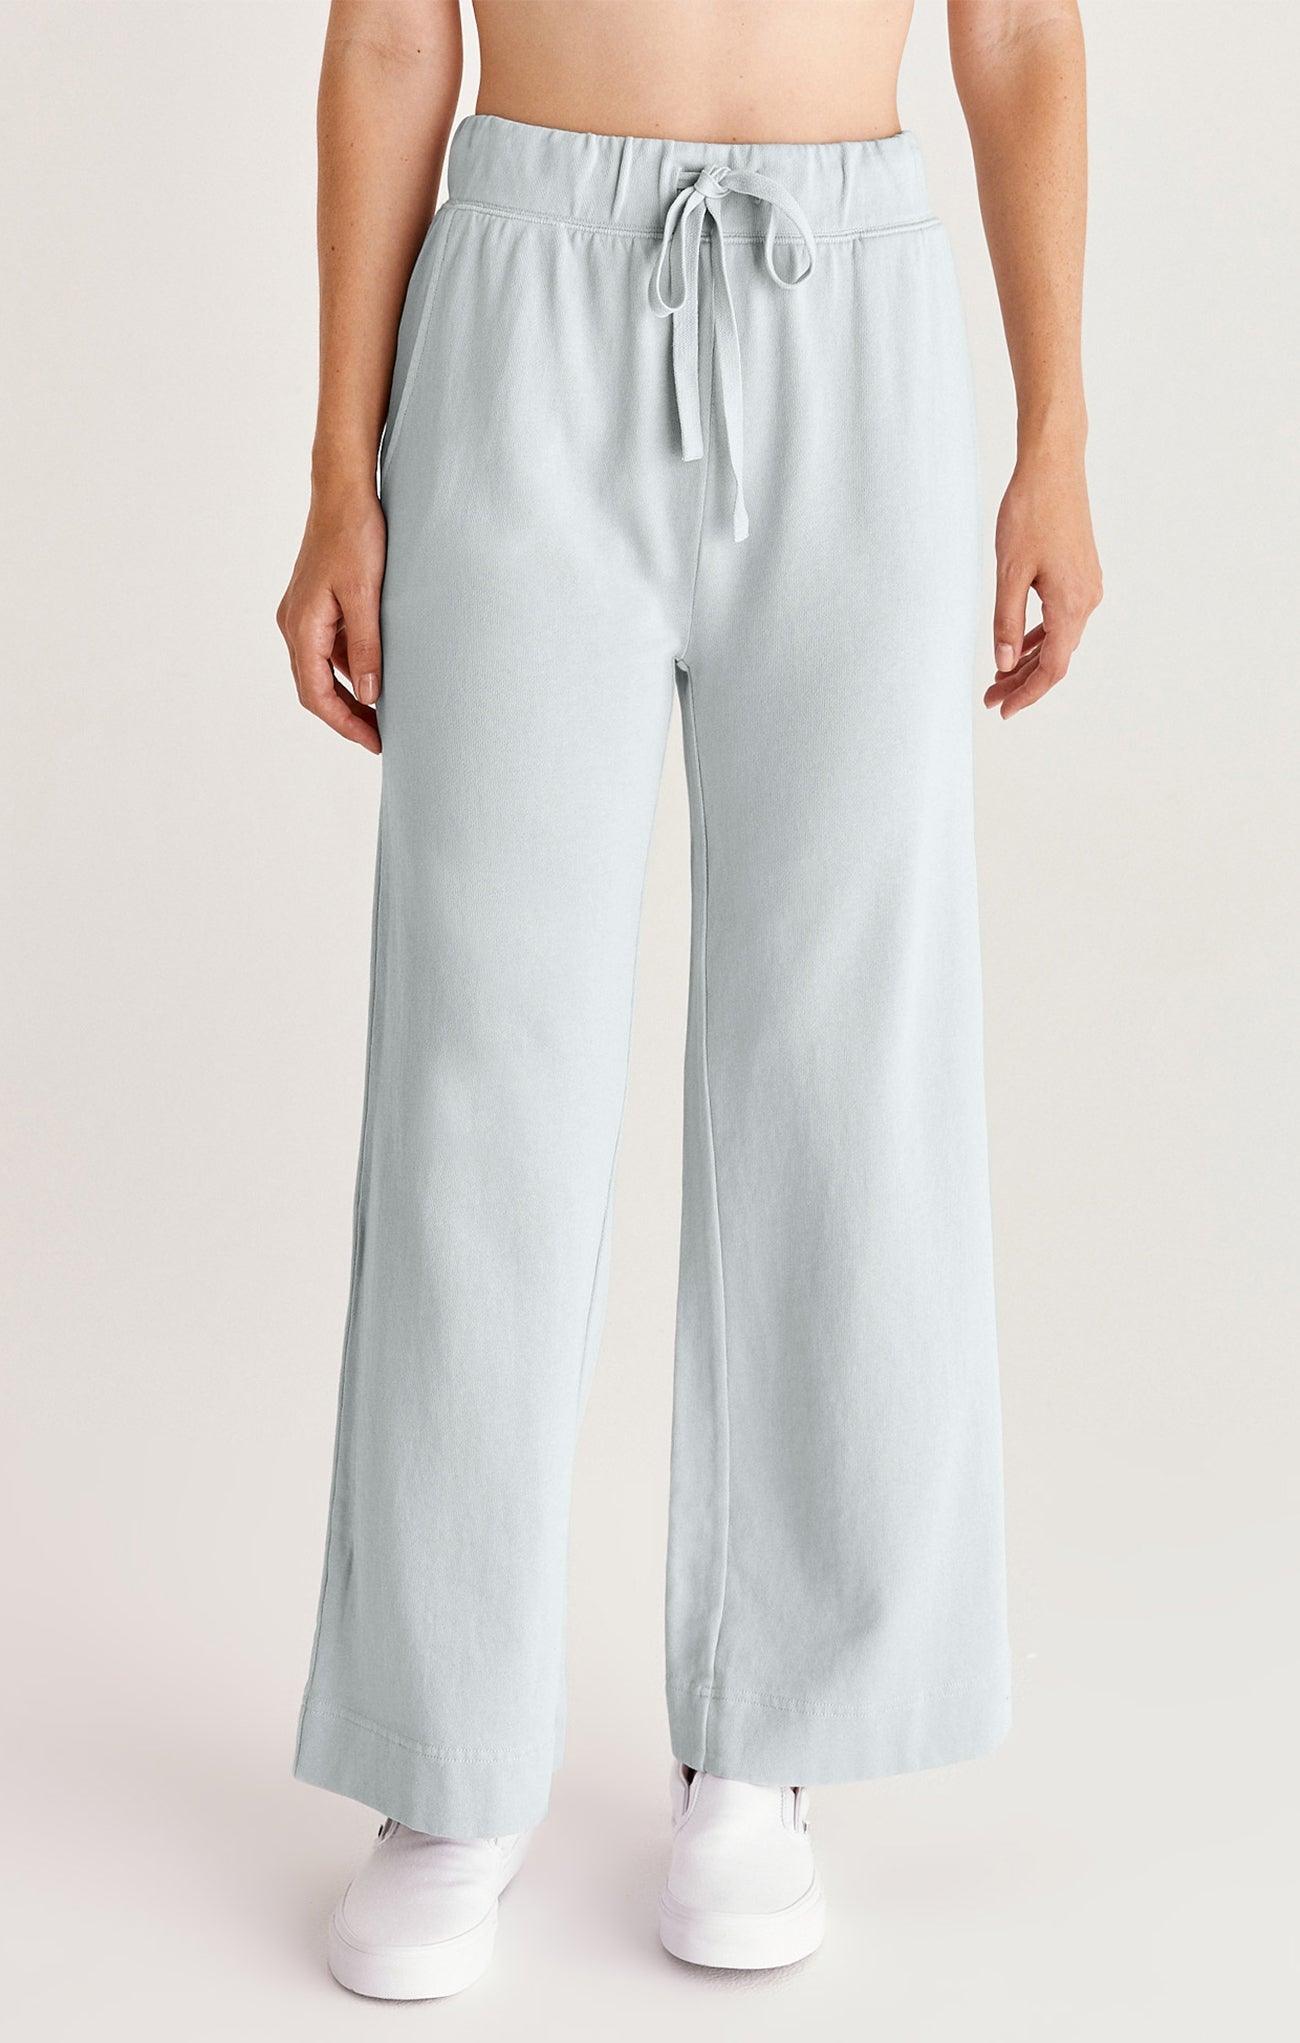 Cyprus washed pant // blue mist